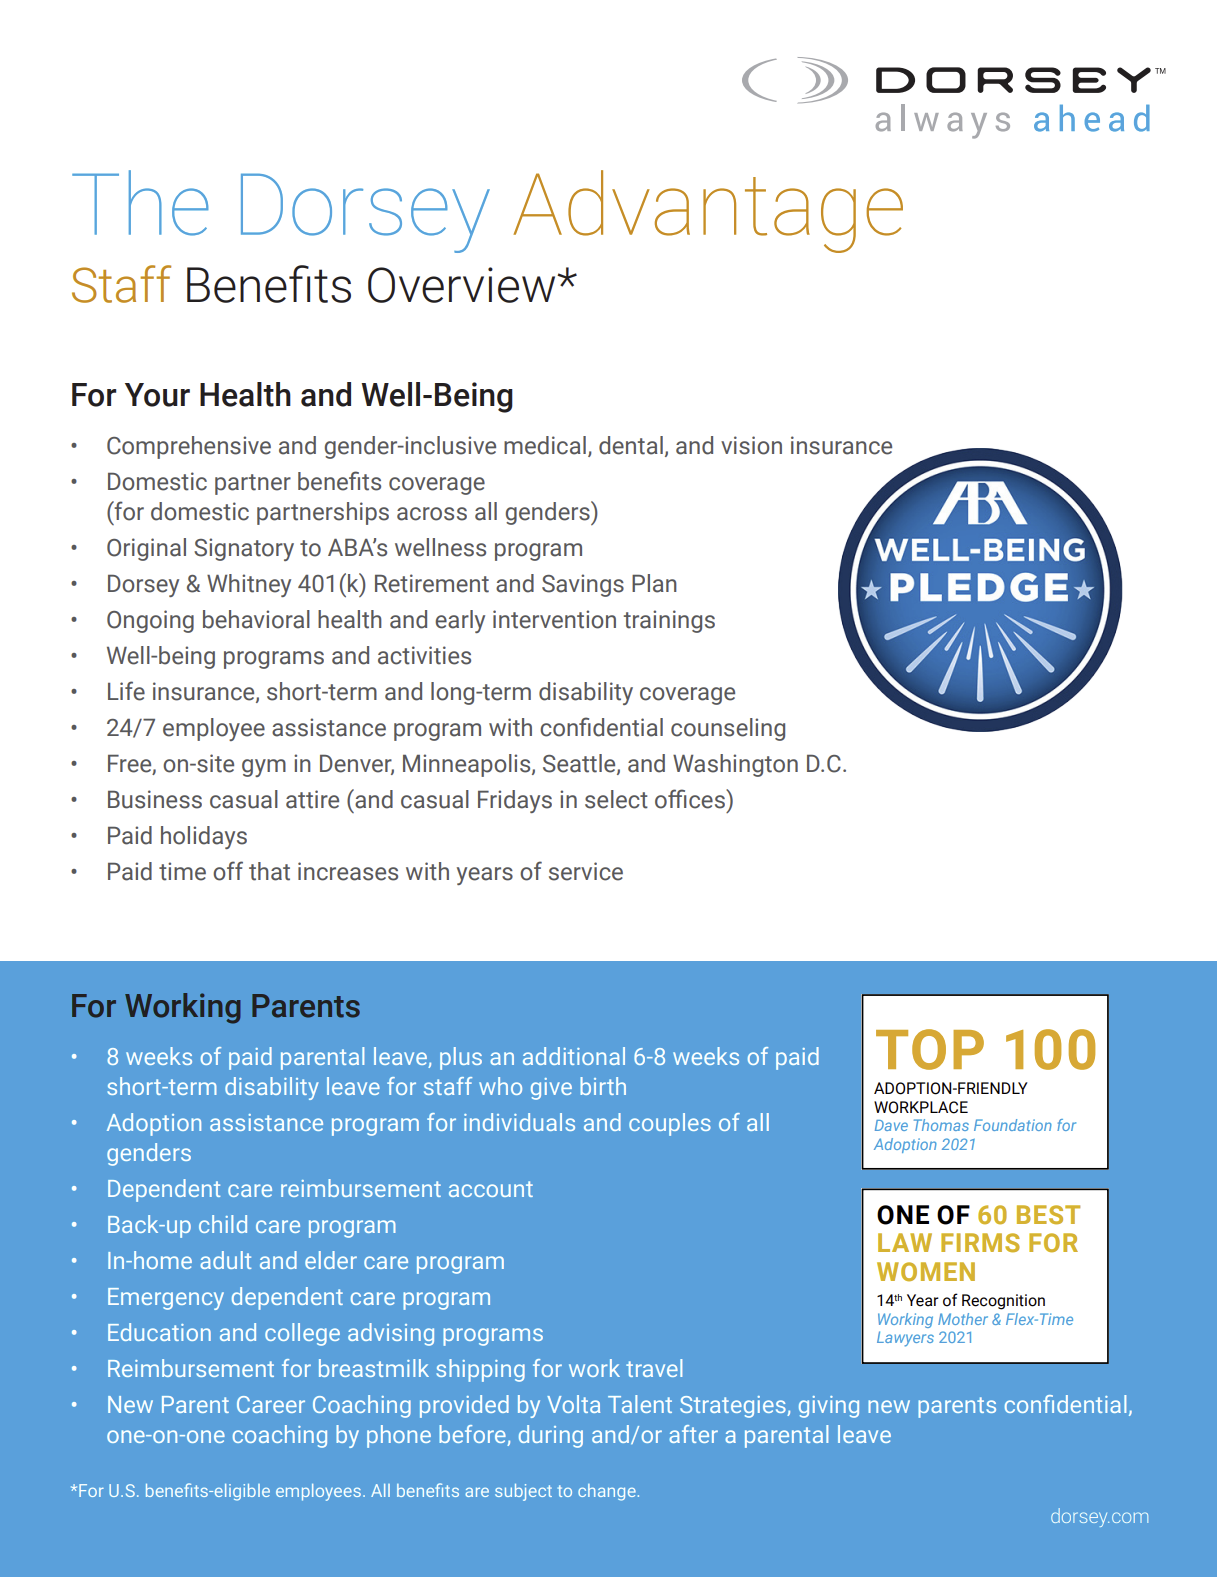 The Dorsey Advantage Staff Benefits Overview